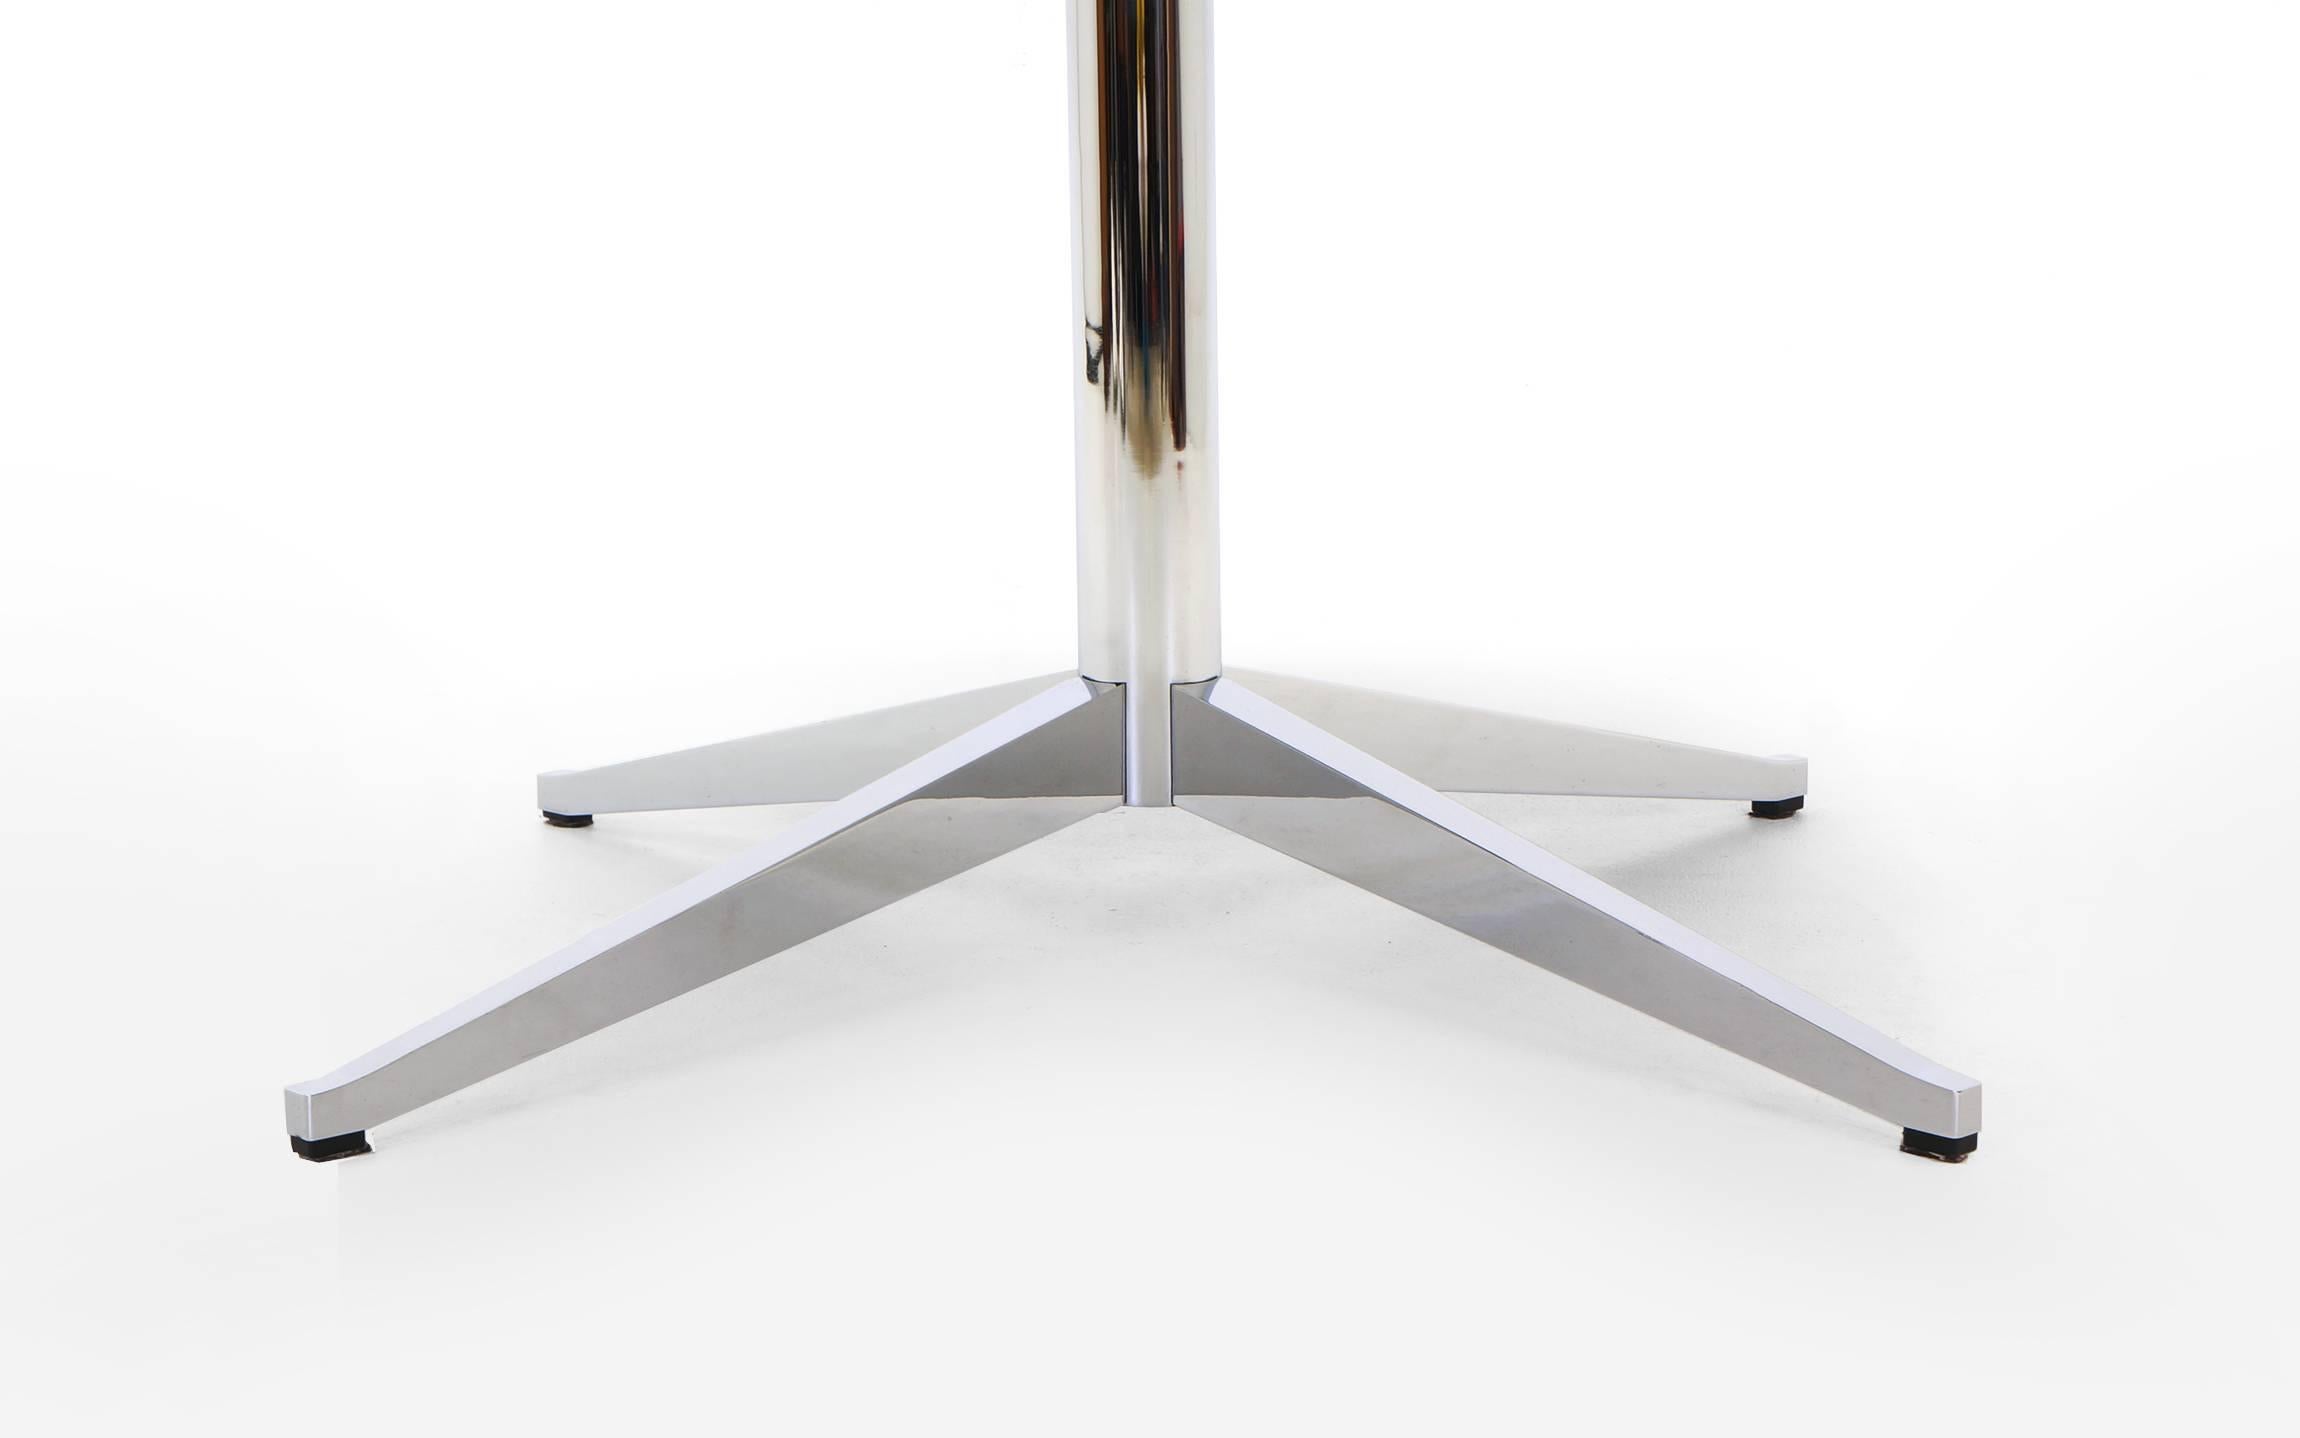 Stunning Florence Knoll polished coated nero marquina marble top table with heavy chromed steel base. The marble top has a deep bevel on the underside giving the substantial marble an elegant, lighter look. Photos can't do this table justice.